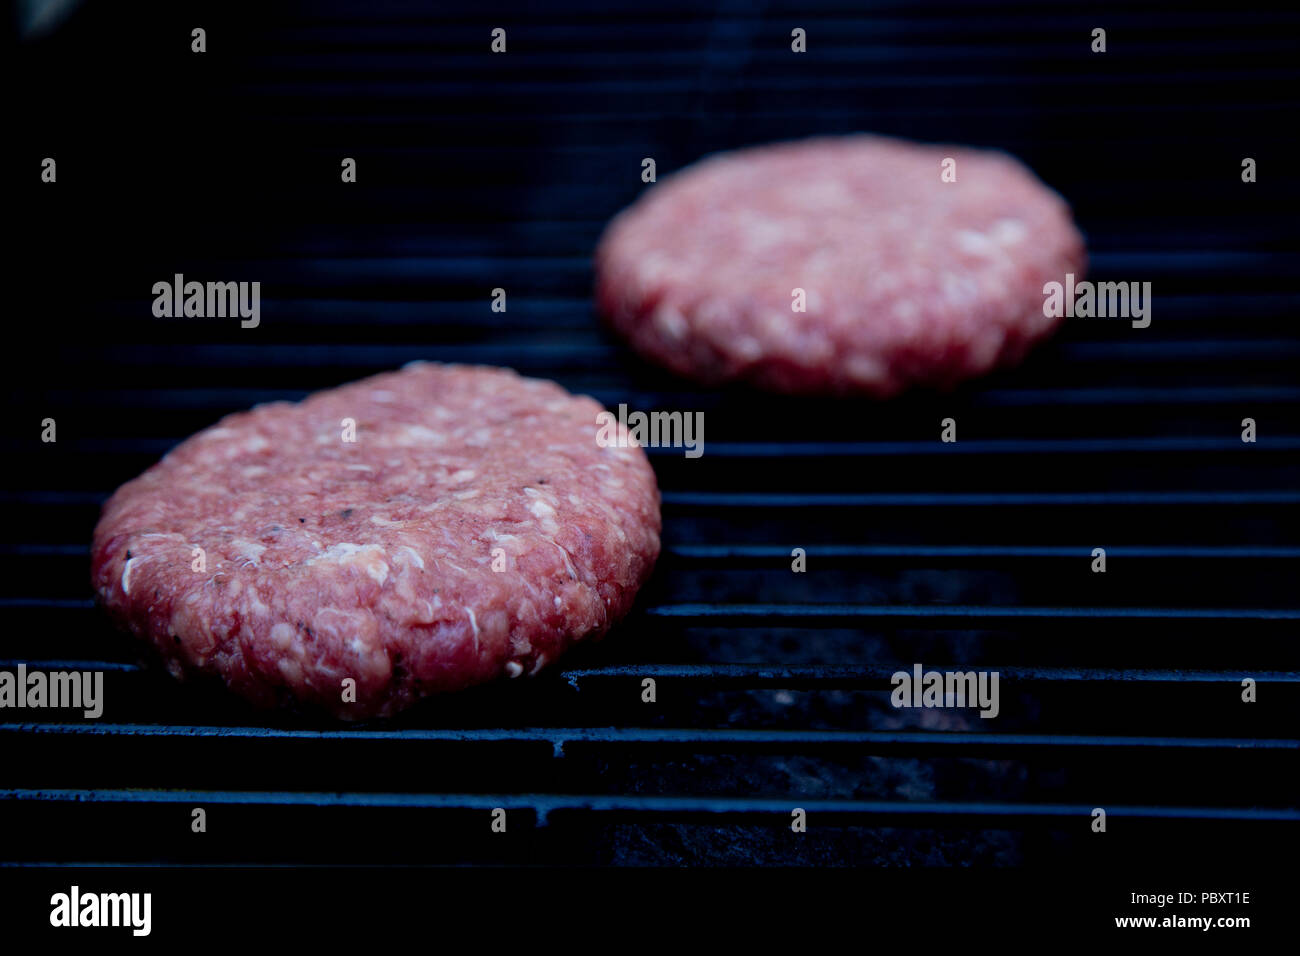 Raw beefburgers about to be cooked on a BBQ Stock Photo